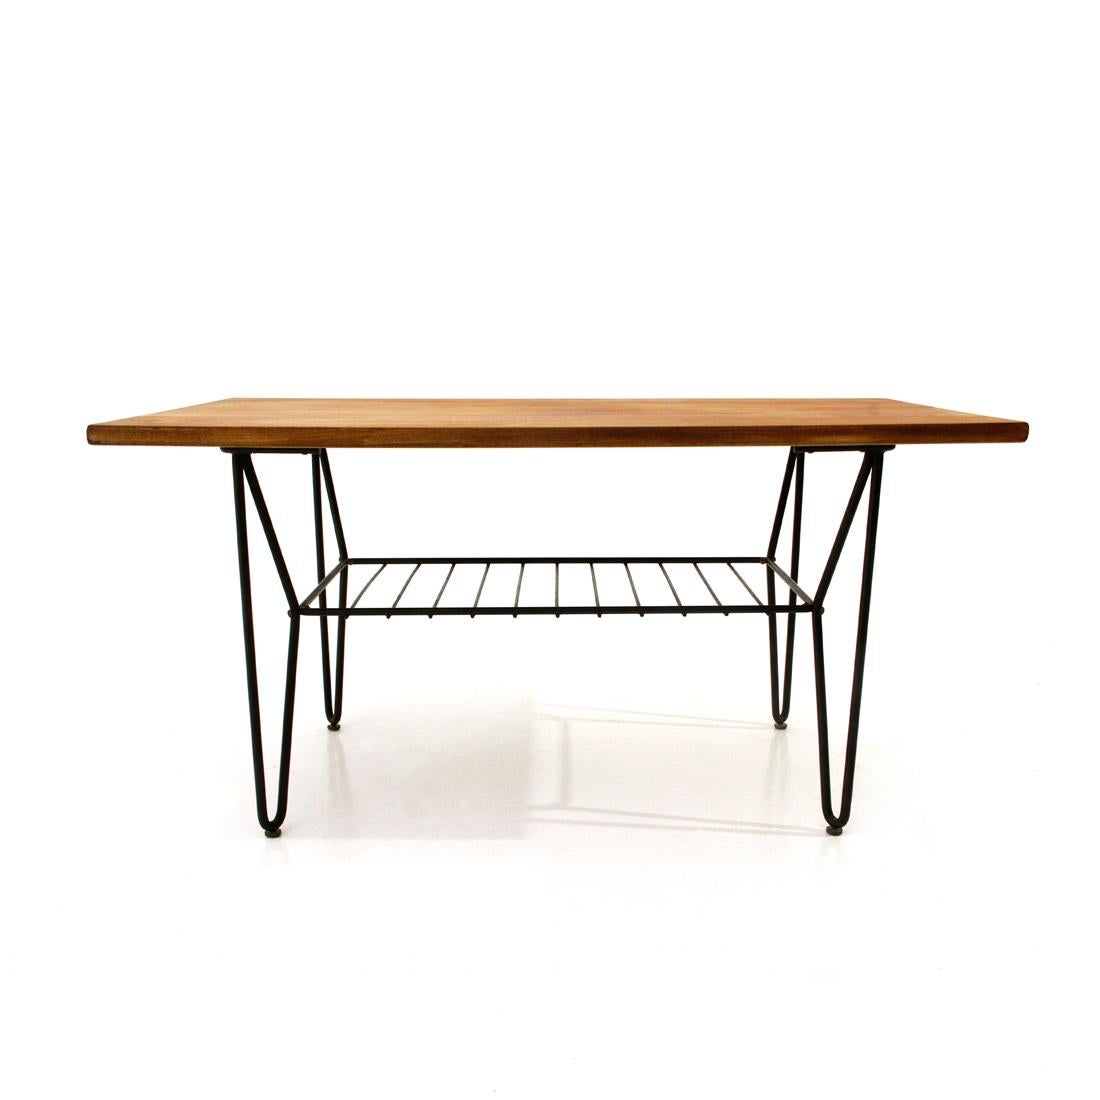 Italian manufacture table produced in the 1950s.
Structure in black painted metal.
Rectangular top in teak veneered wood.
Height adjustable feet in brass.
Good general conditions, some signs due to normal use over time, plan with